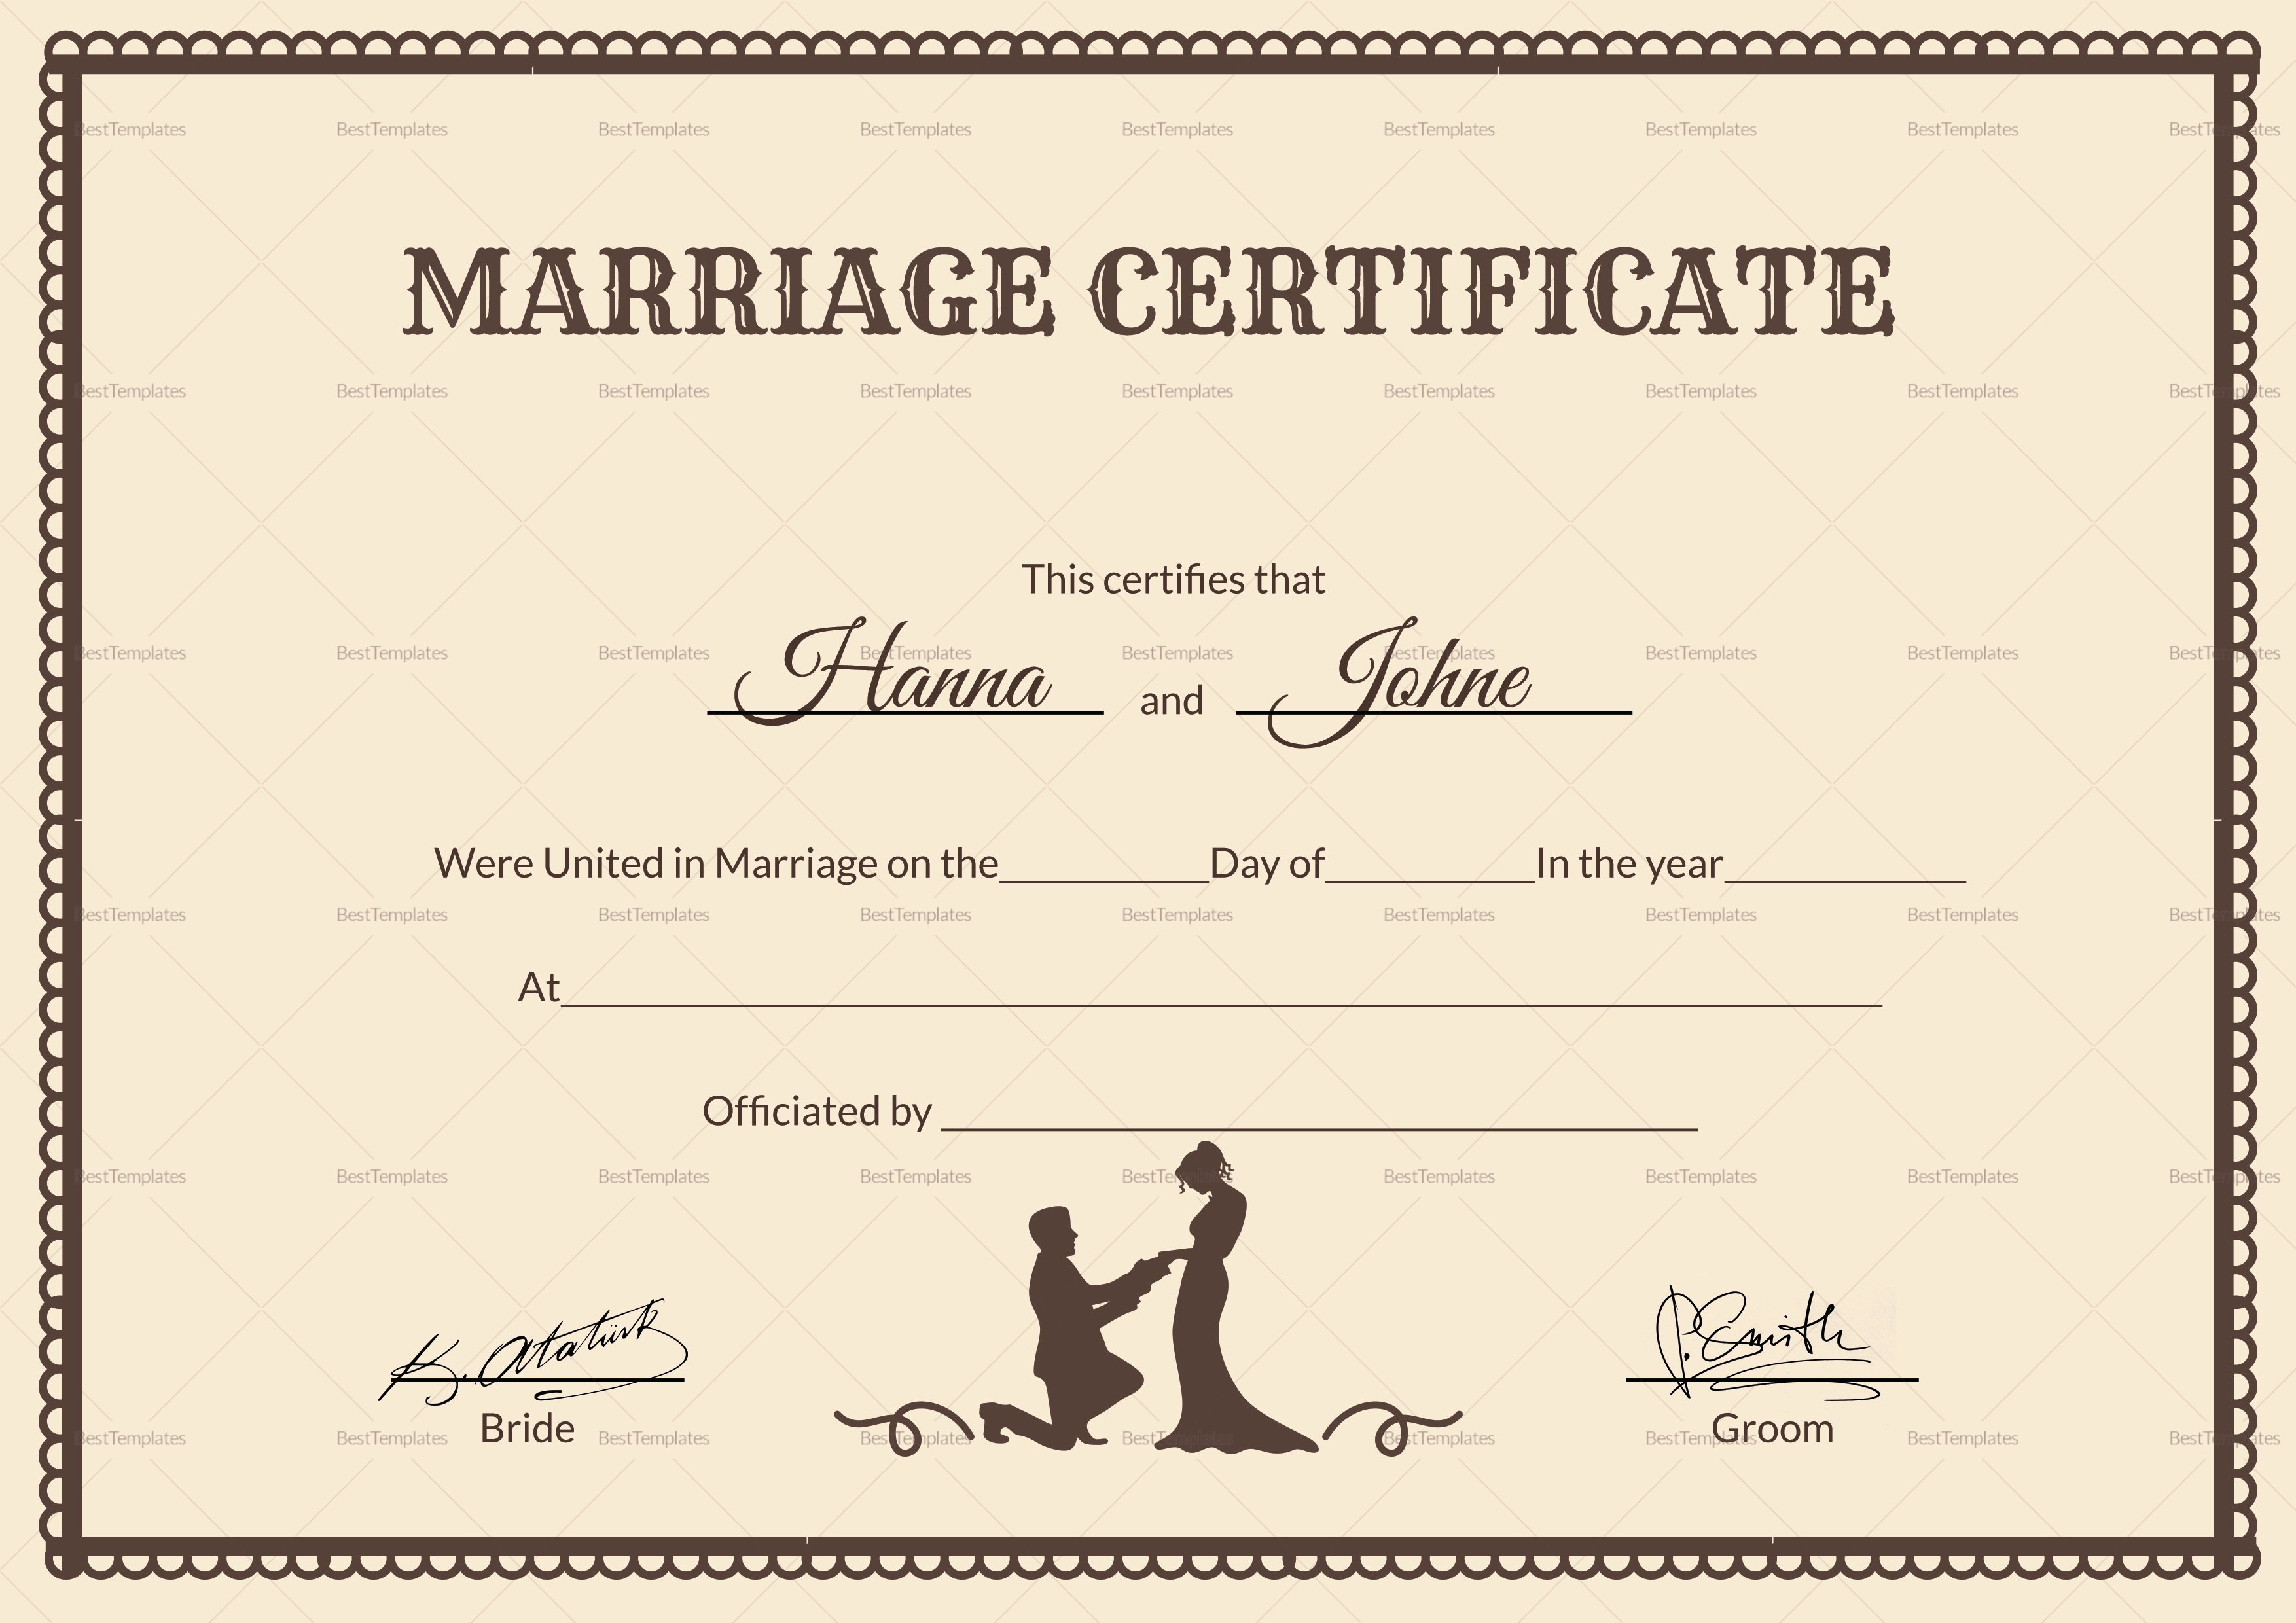 Marriage Certificate Template Word Inspirational Vintage Marriage Certificate Design Template In Psd Word